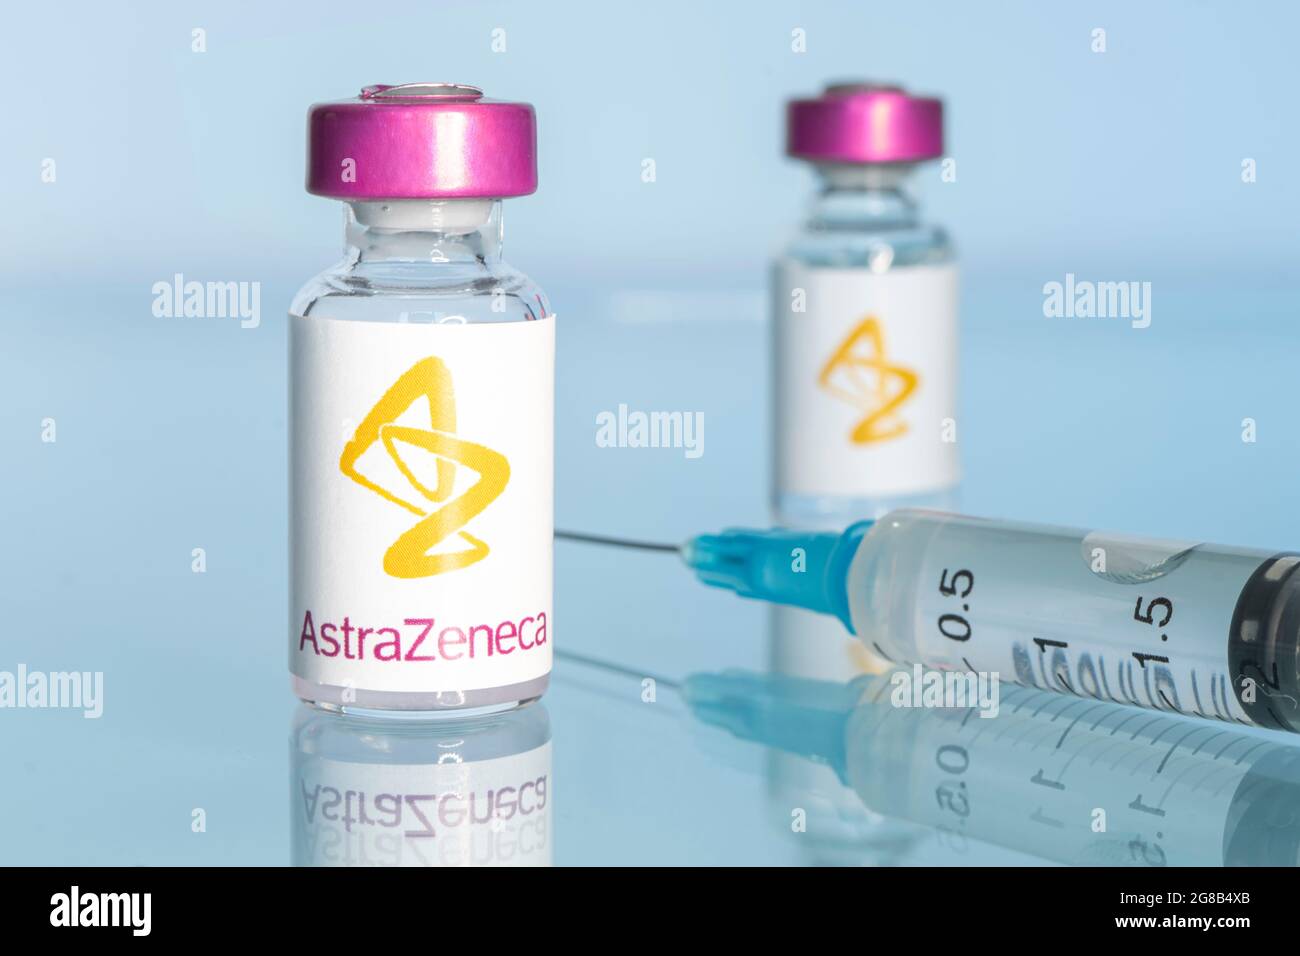 A vaccination syringe and a glass ampoule with a clear liquid on a blue background with the logo of a pharmaceutical company astrazeneca. March 15, 20 Stock Photo